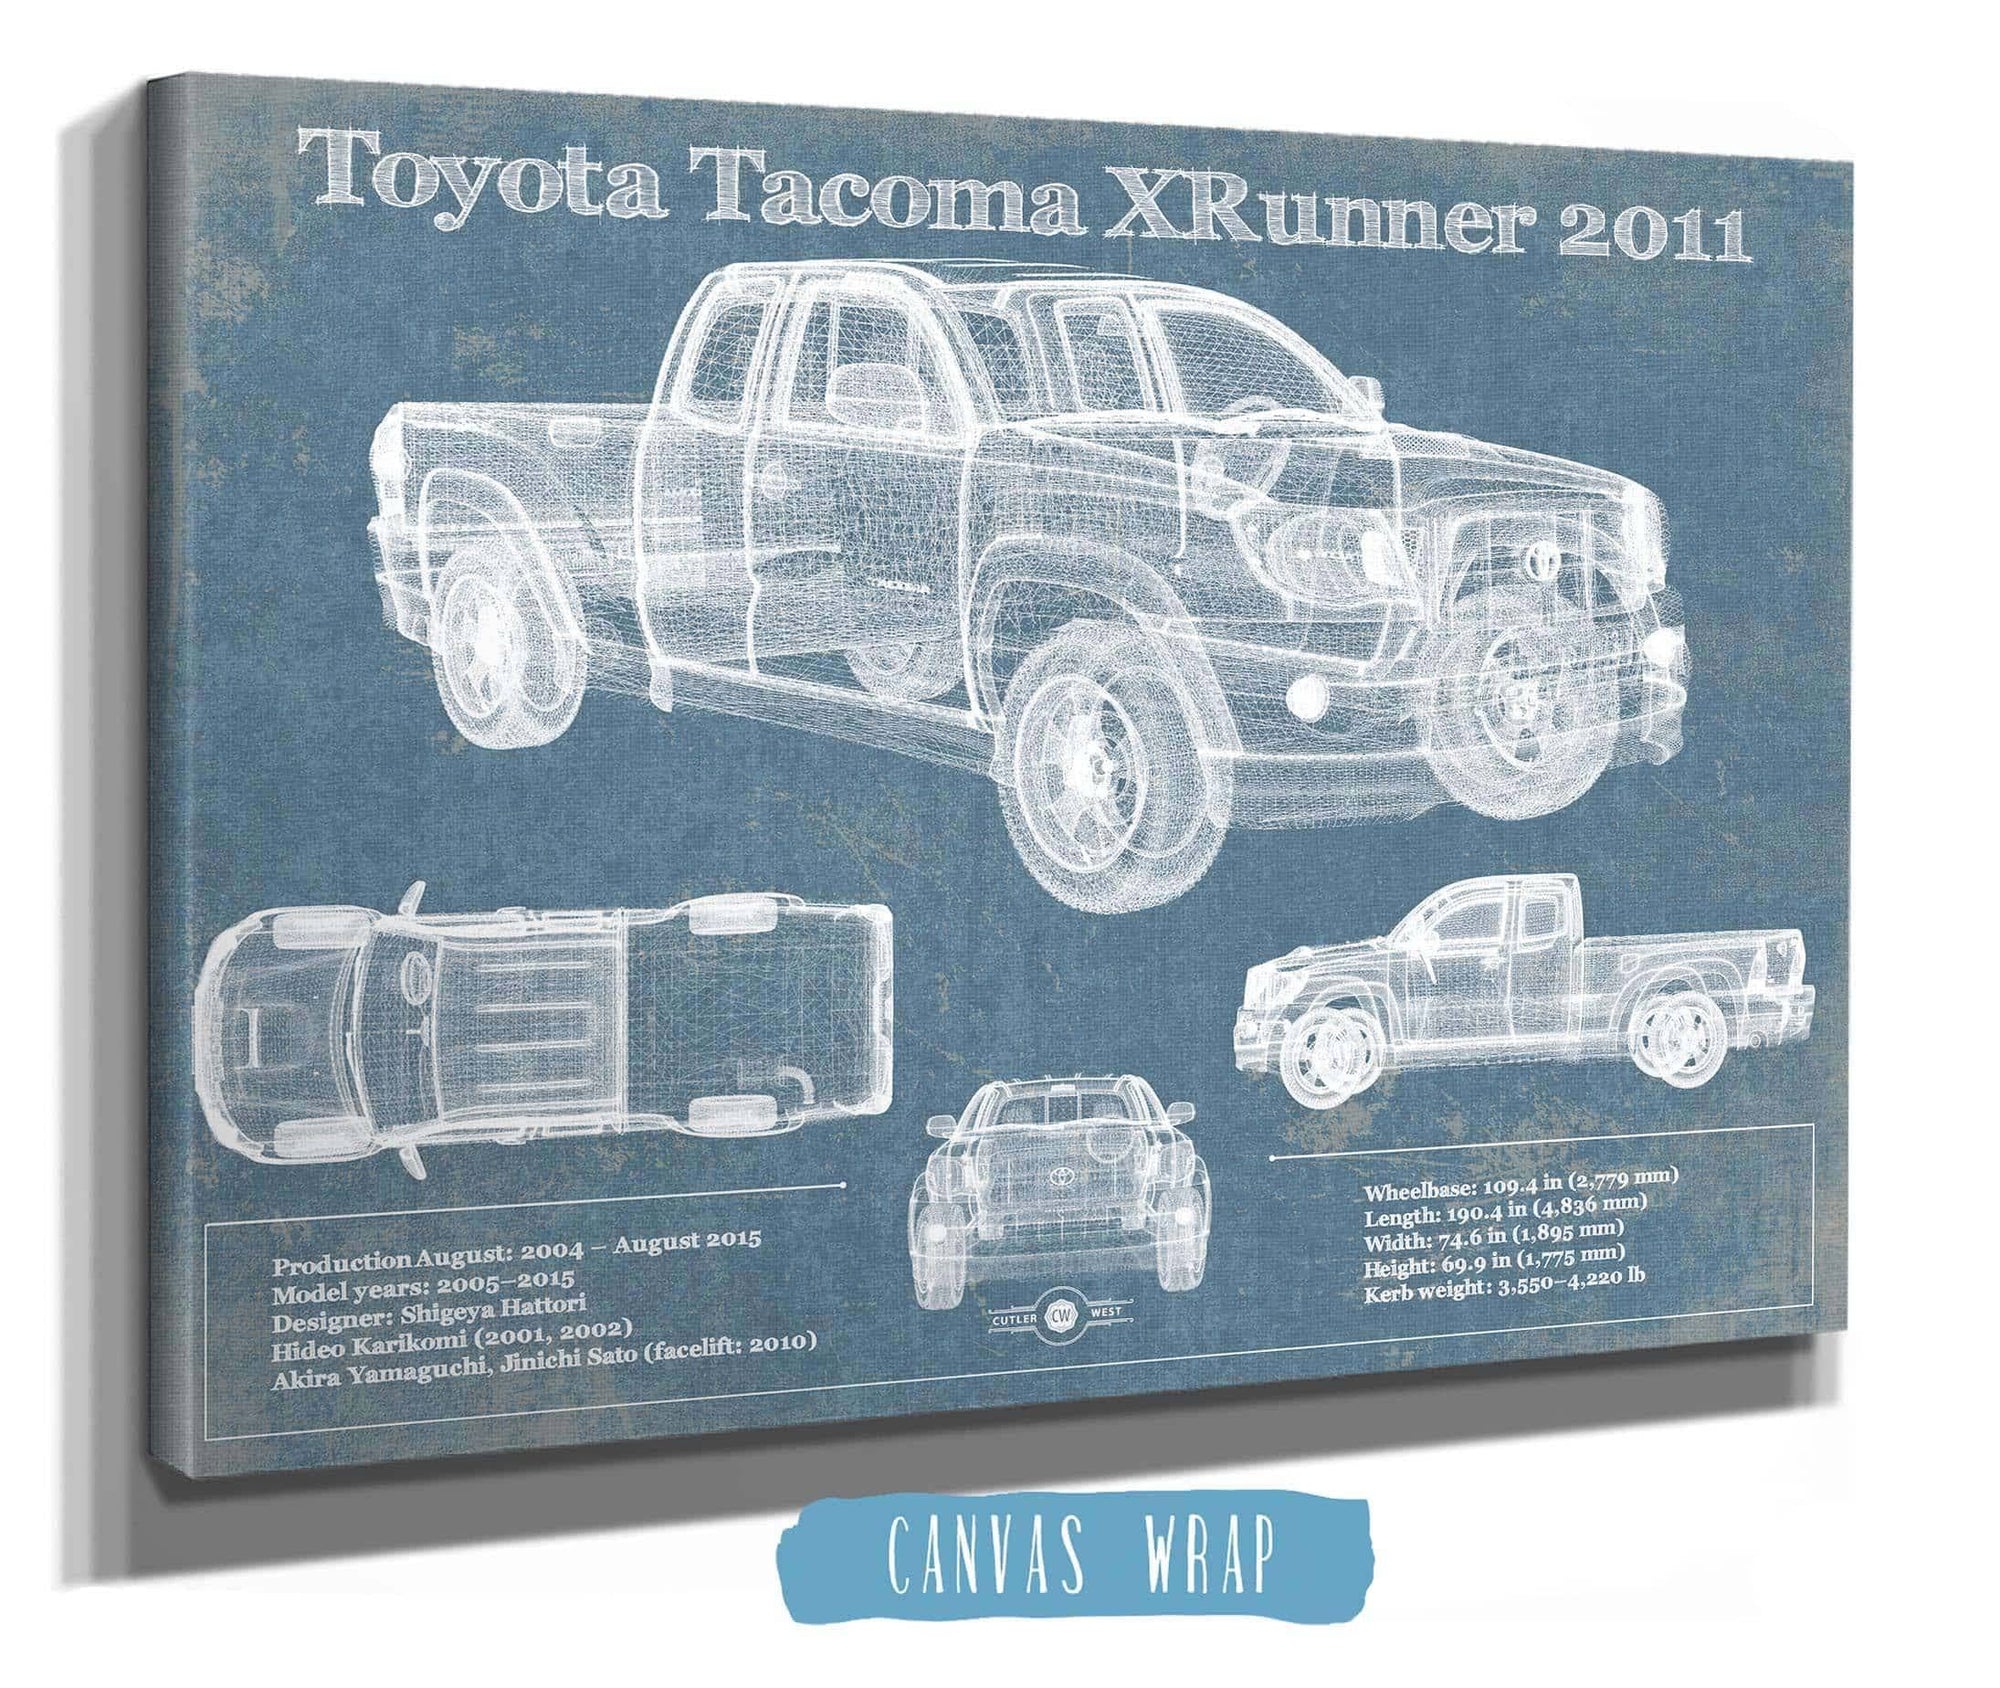 Cutler West Toyota Collection Toyota Tacoma XRunner 2011 Vintage Blueprint Auto Print